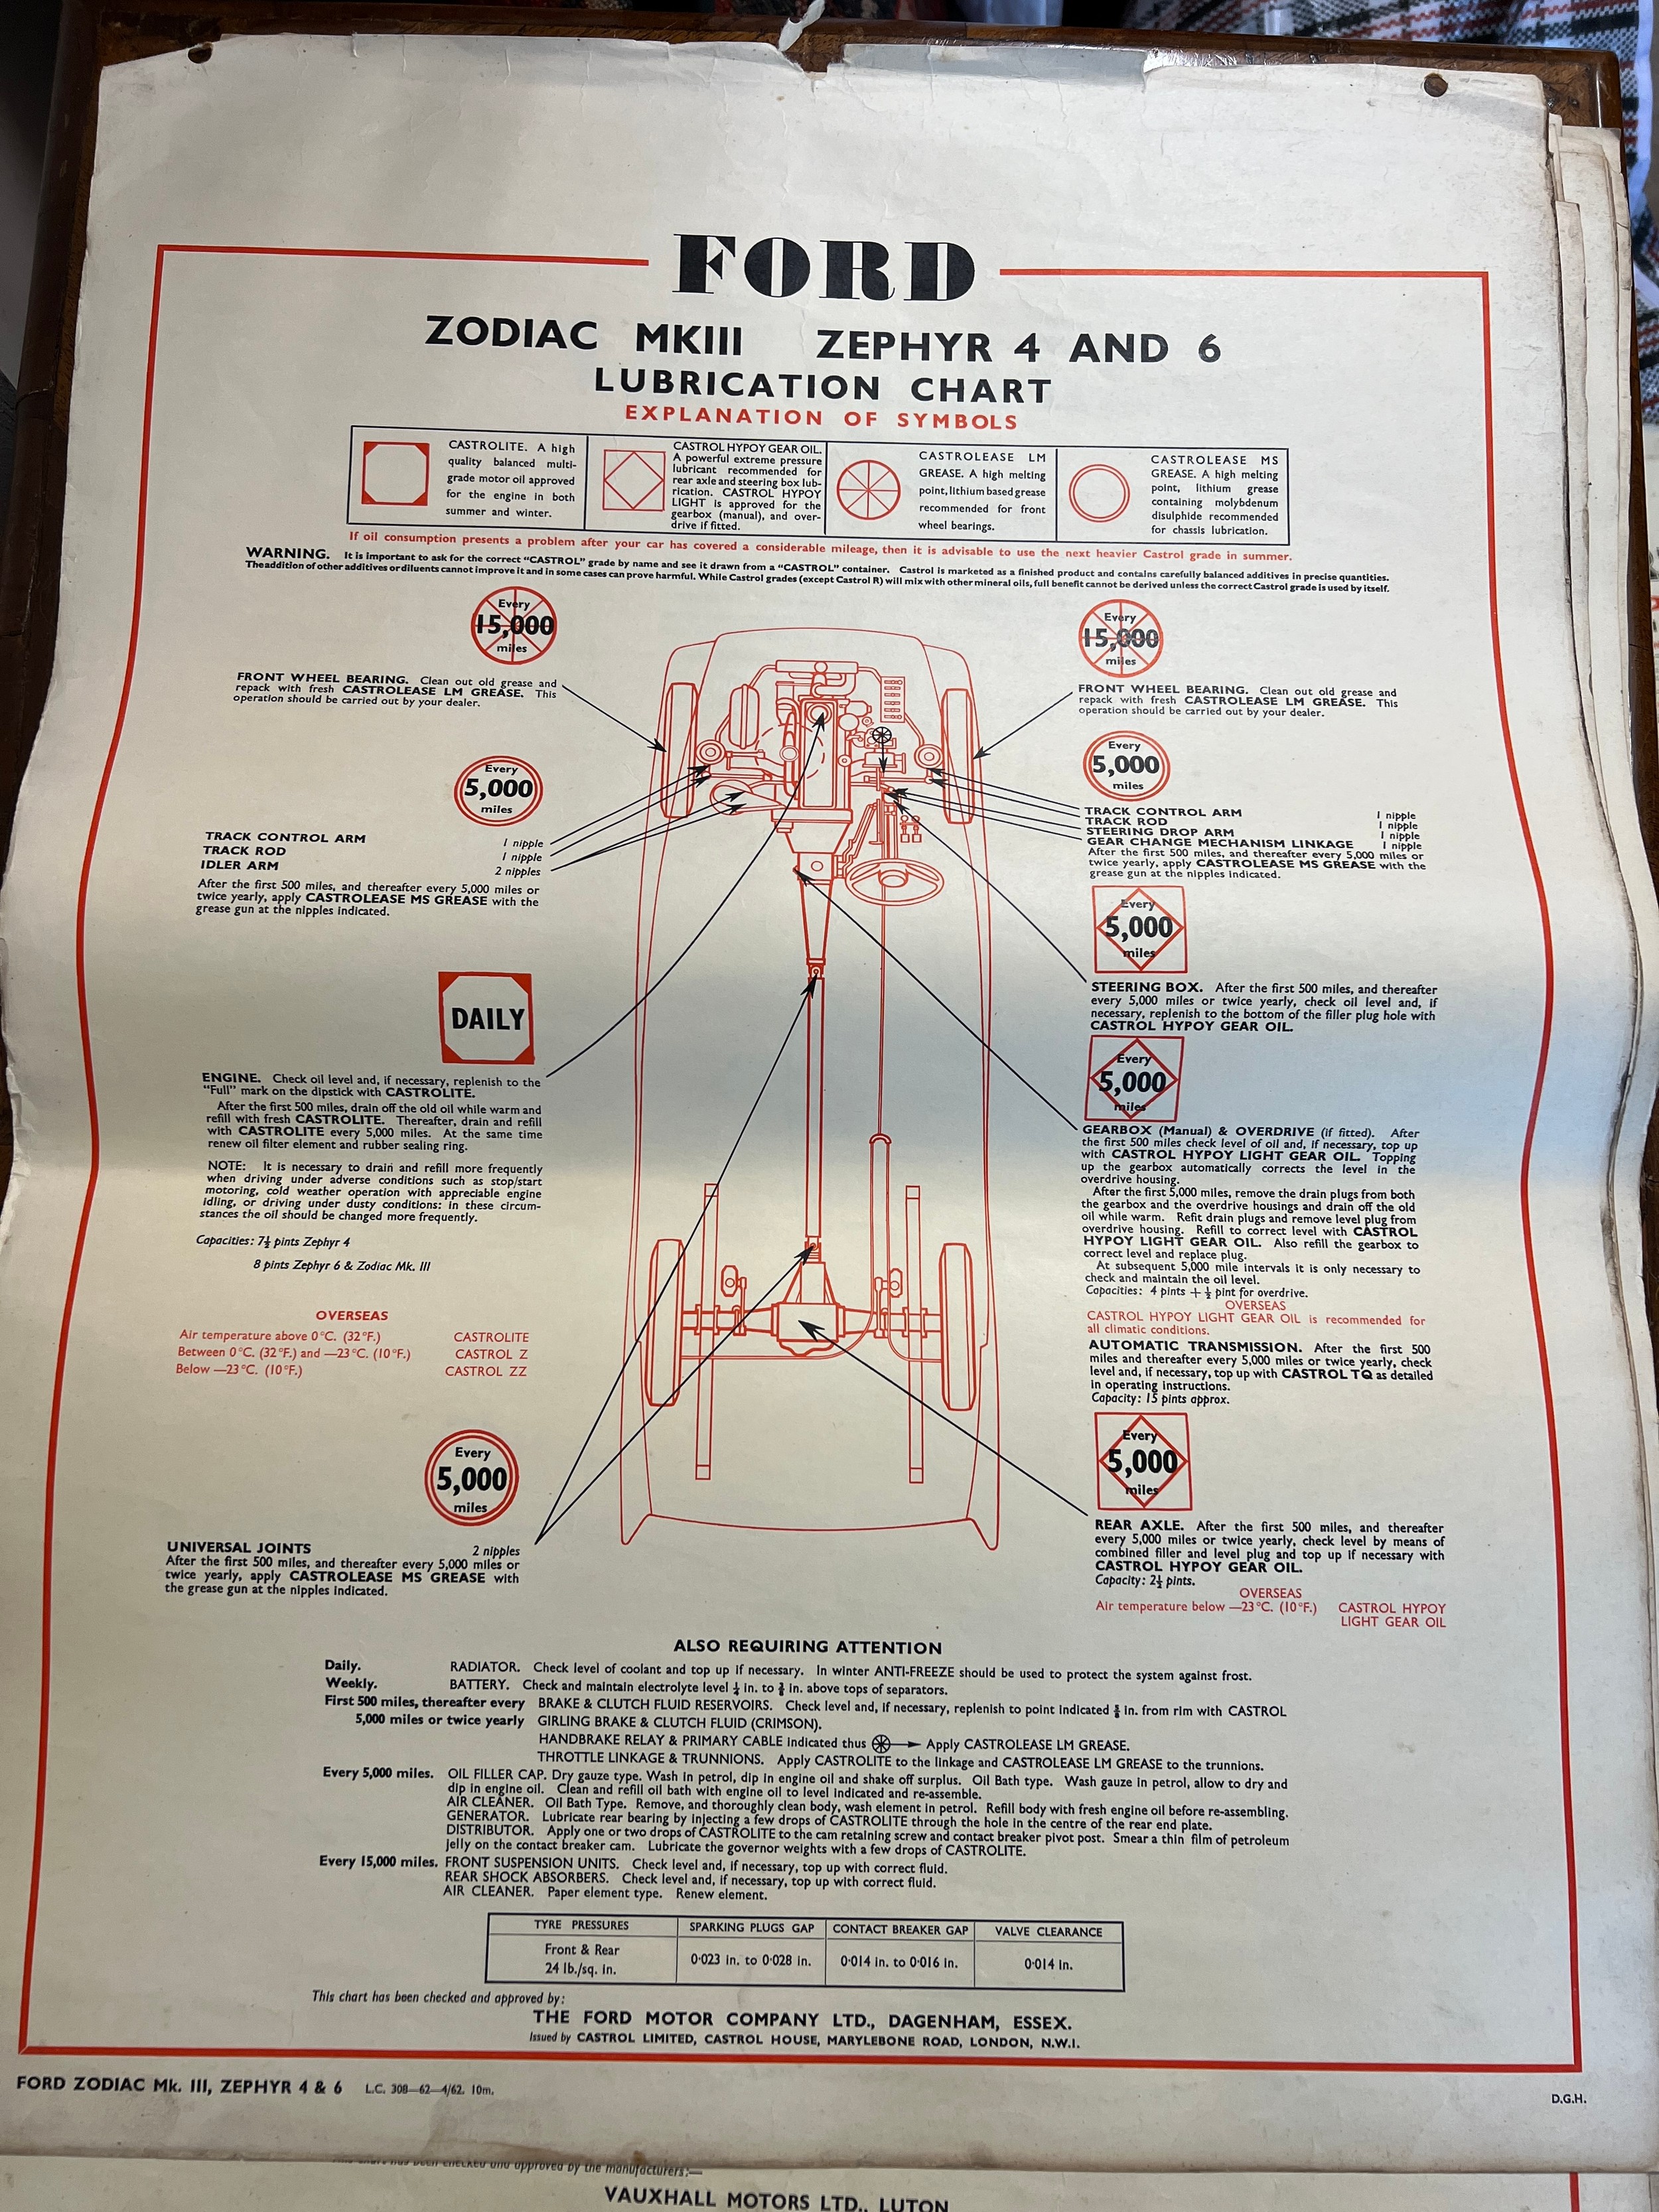 Thirty one vintage car lubrication charts to include Wolseley, Morris, MG 1100, Morris 1100, - Image 9 of 31